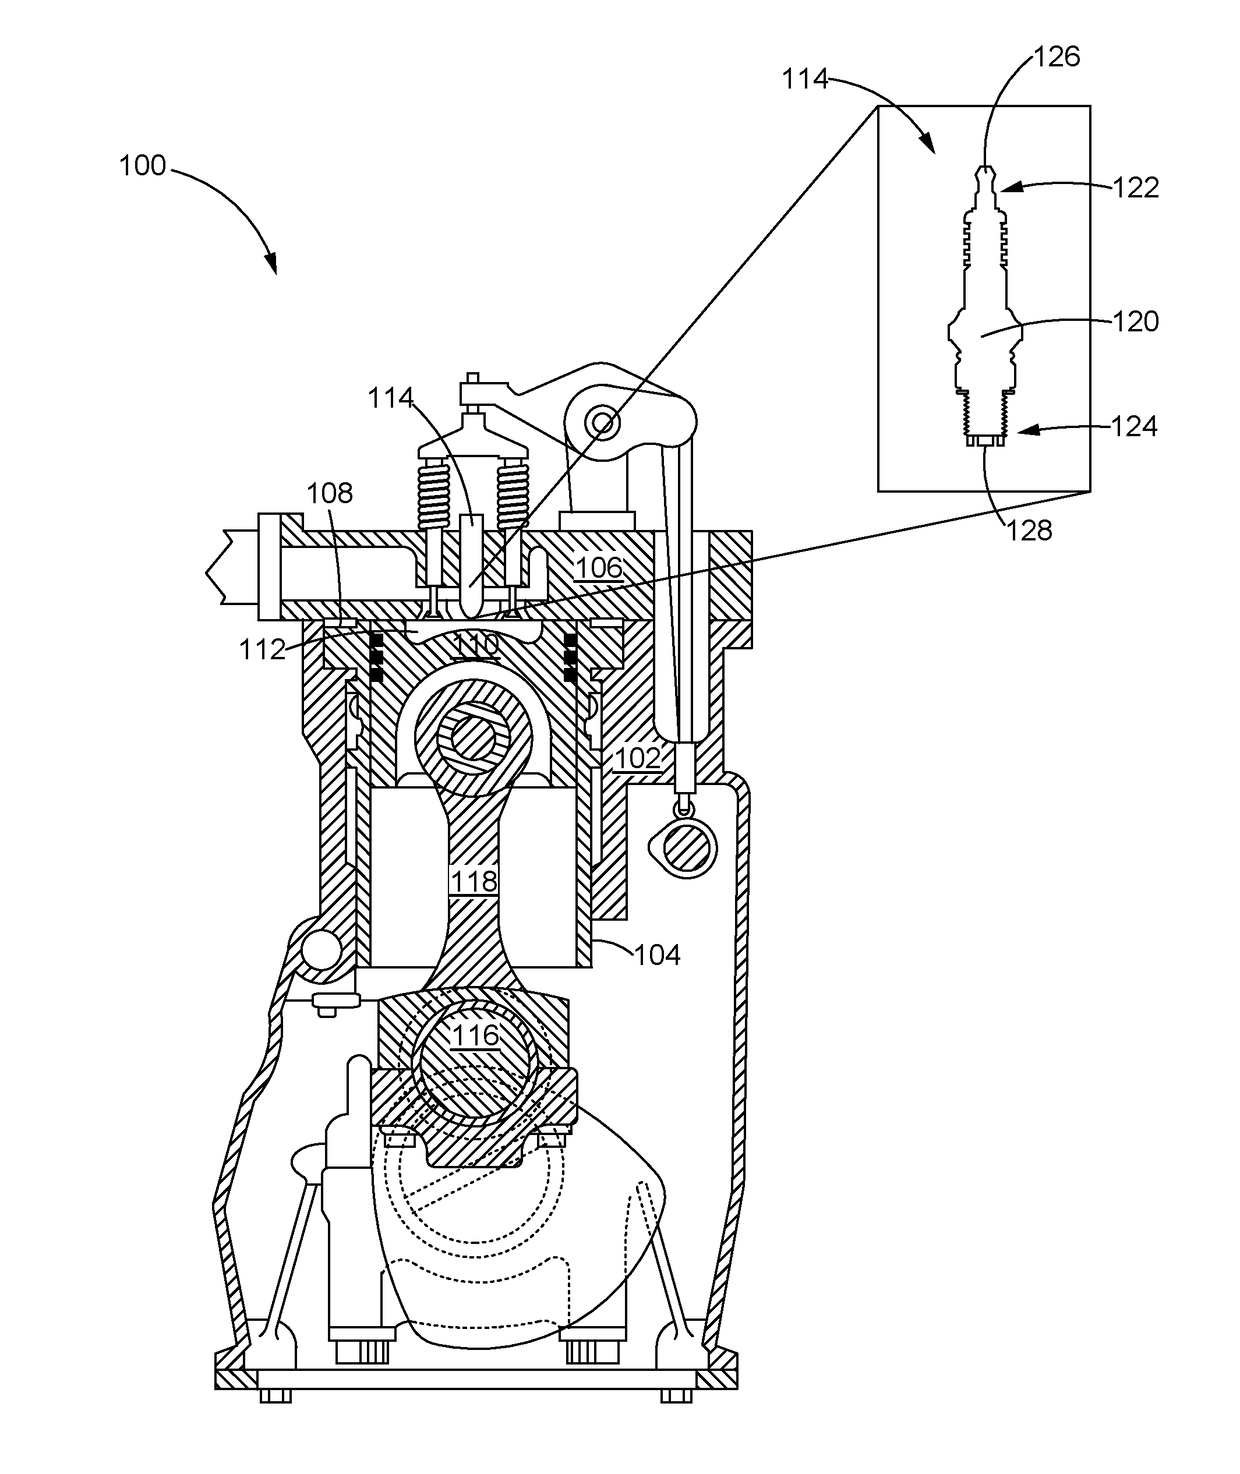 Gas engine ignition system for extending life and lean limit